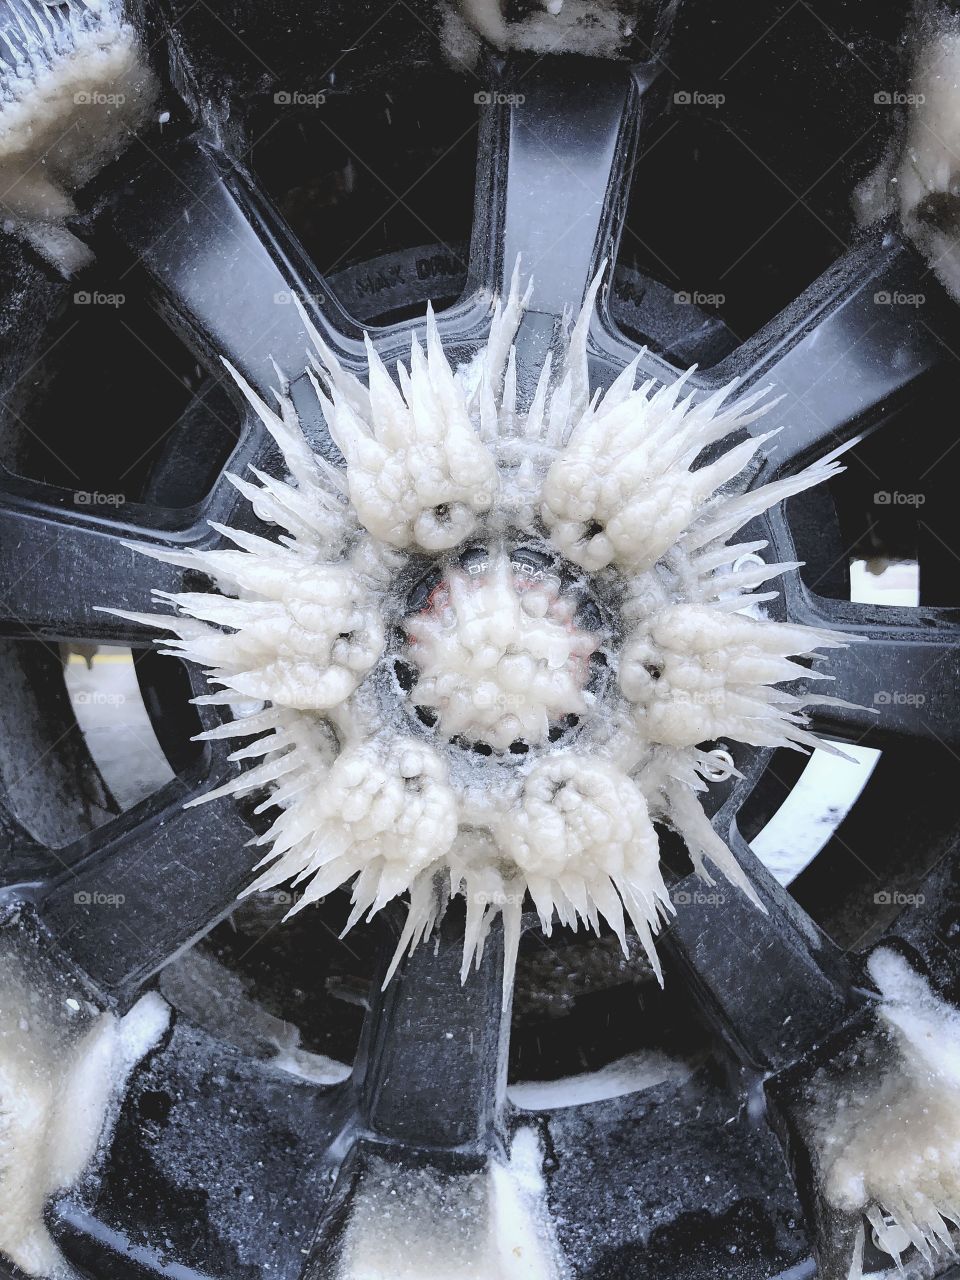 Ice build up on a wheel 